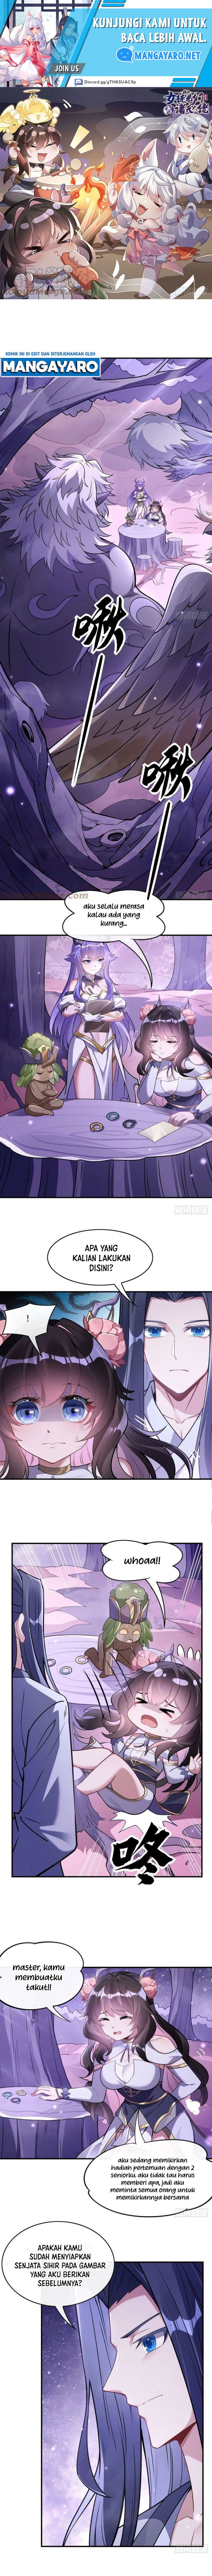 Dilarang COPAS - situs resmi www.mangacanblog.com - Komik my female apprentices are all big shots from the future 160 - chapter 160 161 Indonesia my female apprentices are all big shots from the future 160 - chapter 160 Terbaru 1|Baca Manga Komik Indonesia|Mangacan